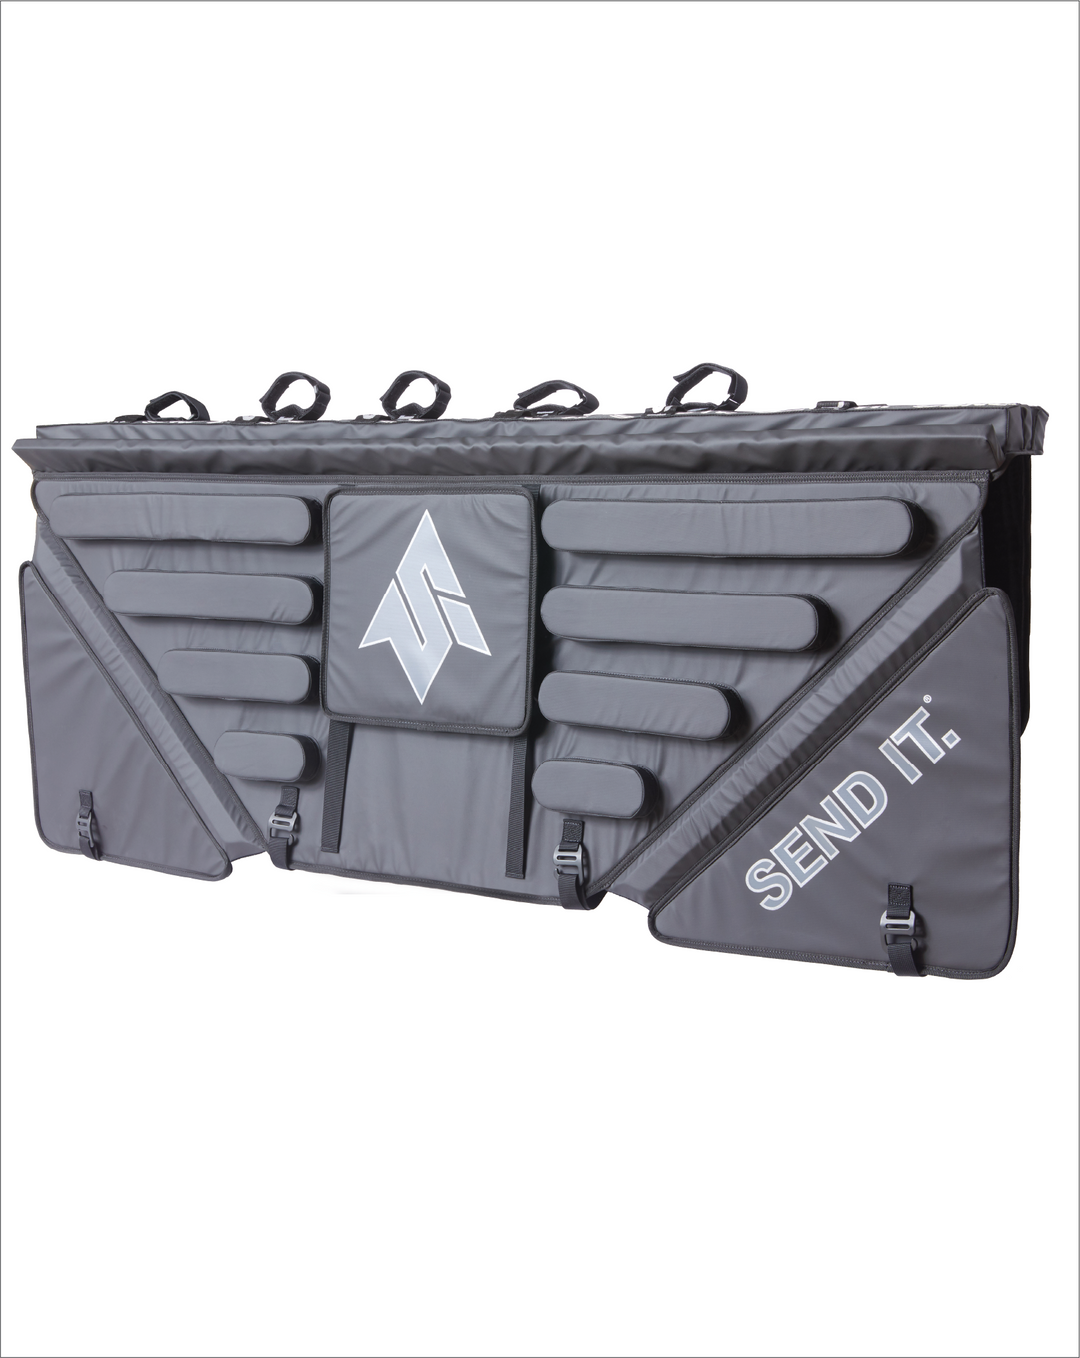 Image of the Mid Size Send It High Roller Tailgate Pad. Shows the pad from the front and at angle as if the tailgate pad was installed on a truck with inside of the tailgate pad showing. The truck tailgate bike pad has a sliding window, heavy duty padding, and 5 straps to secure your bikes.